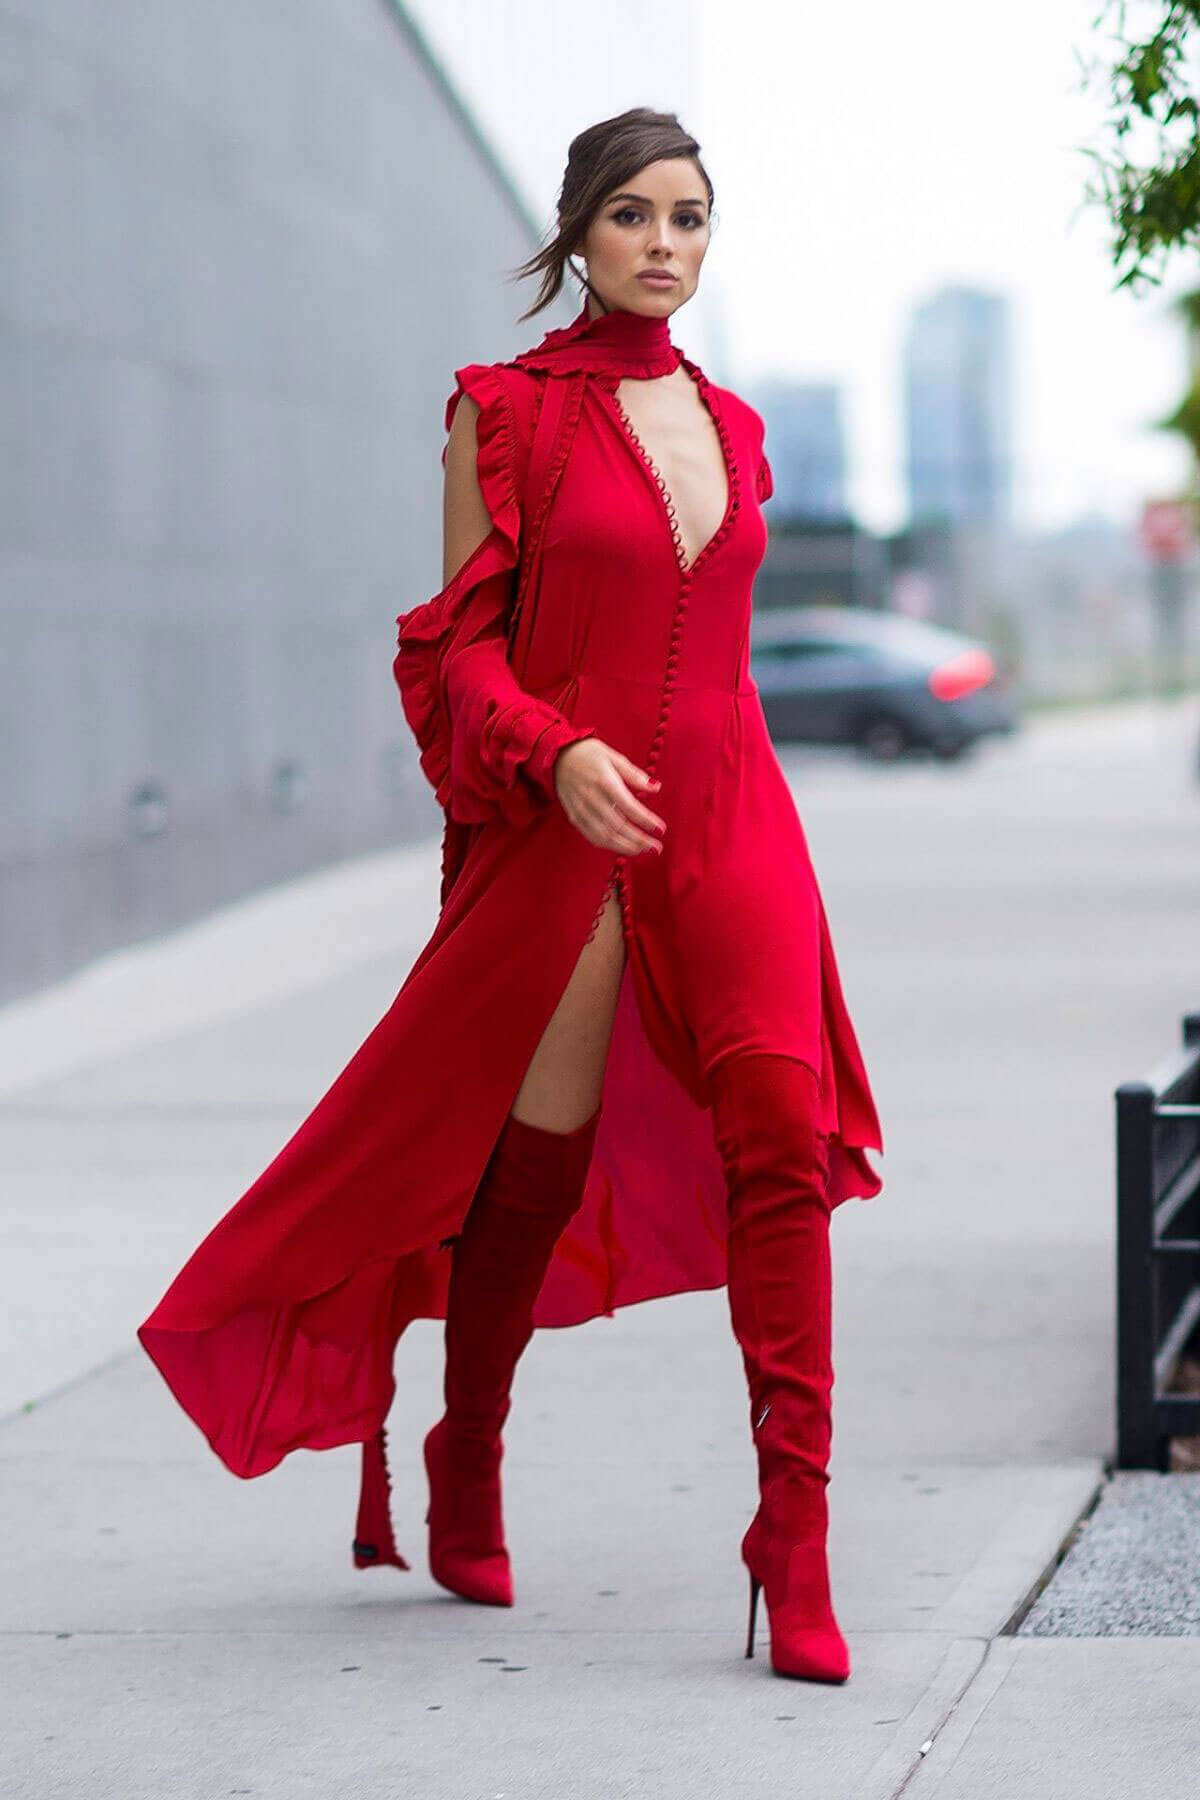 Olivia Culpo Wearing Red Dress Out and About in Long Island